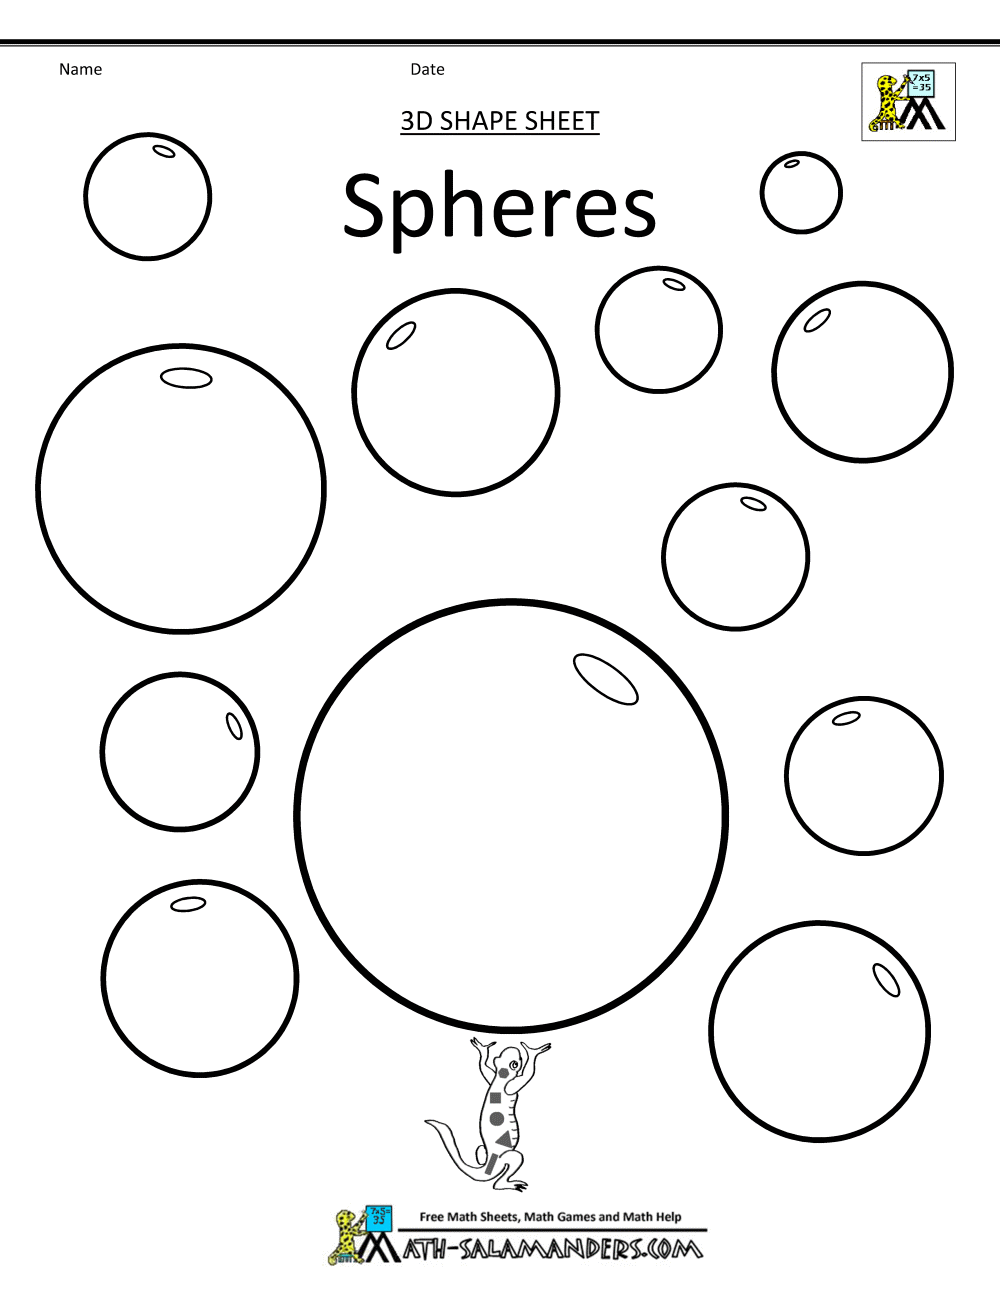 Sphere coloring, Download Sphere coloring for free 2019